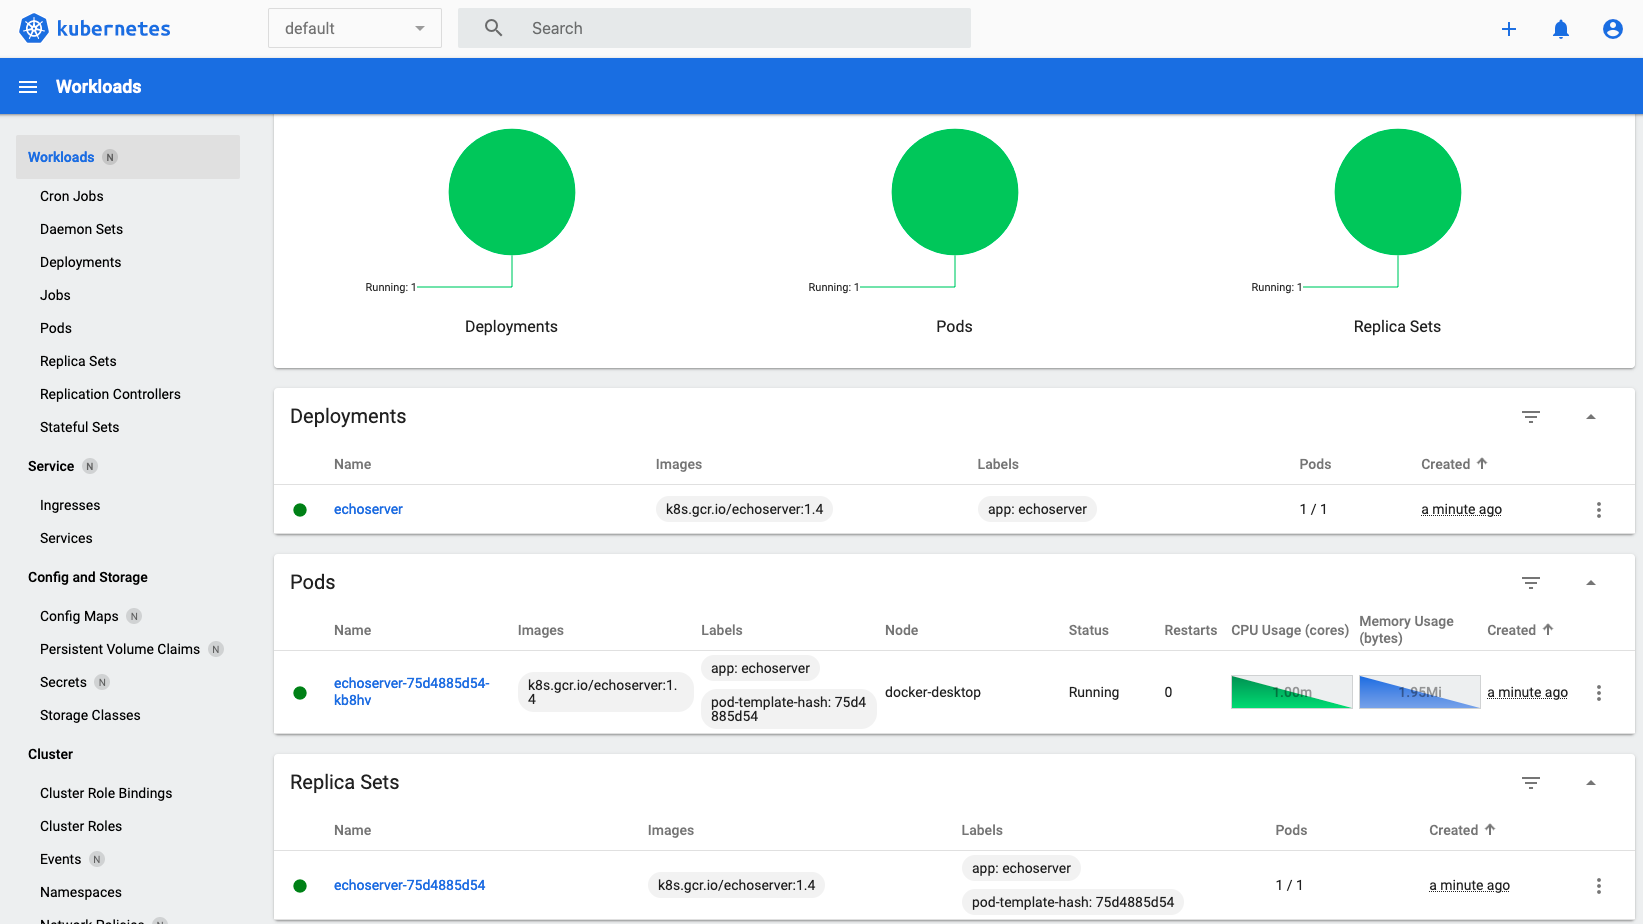 Workloads in the Kubernetes dashboard